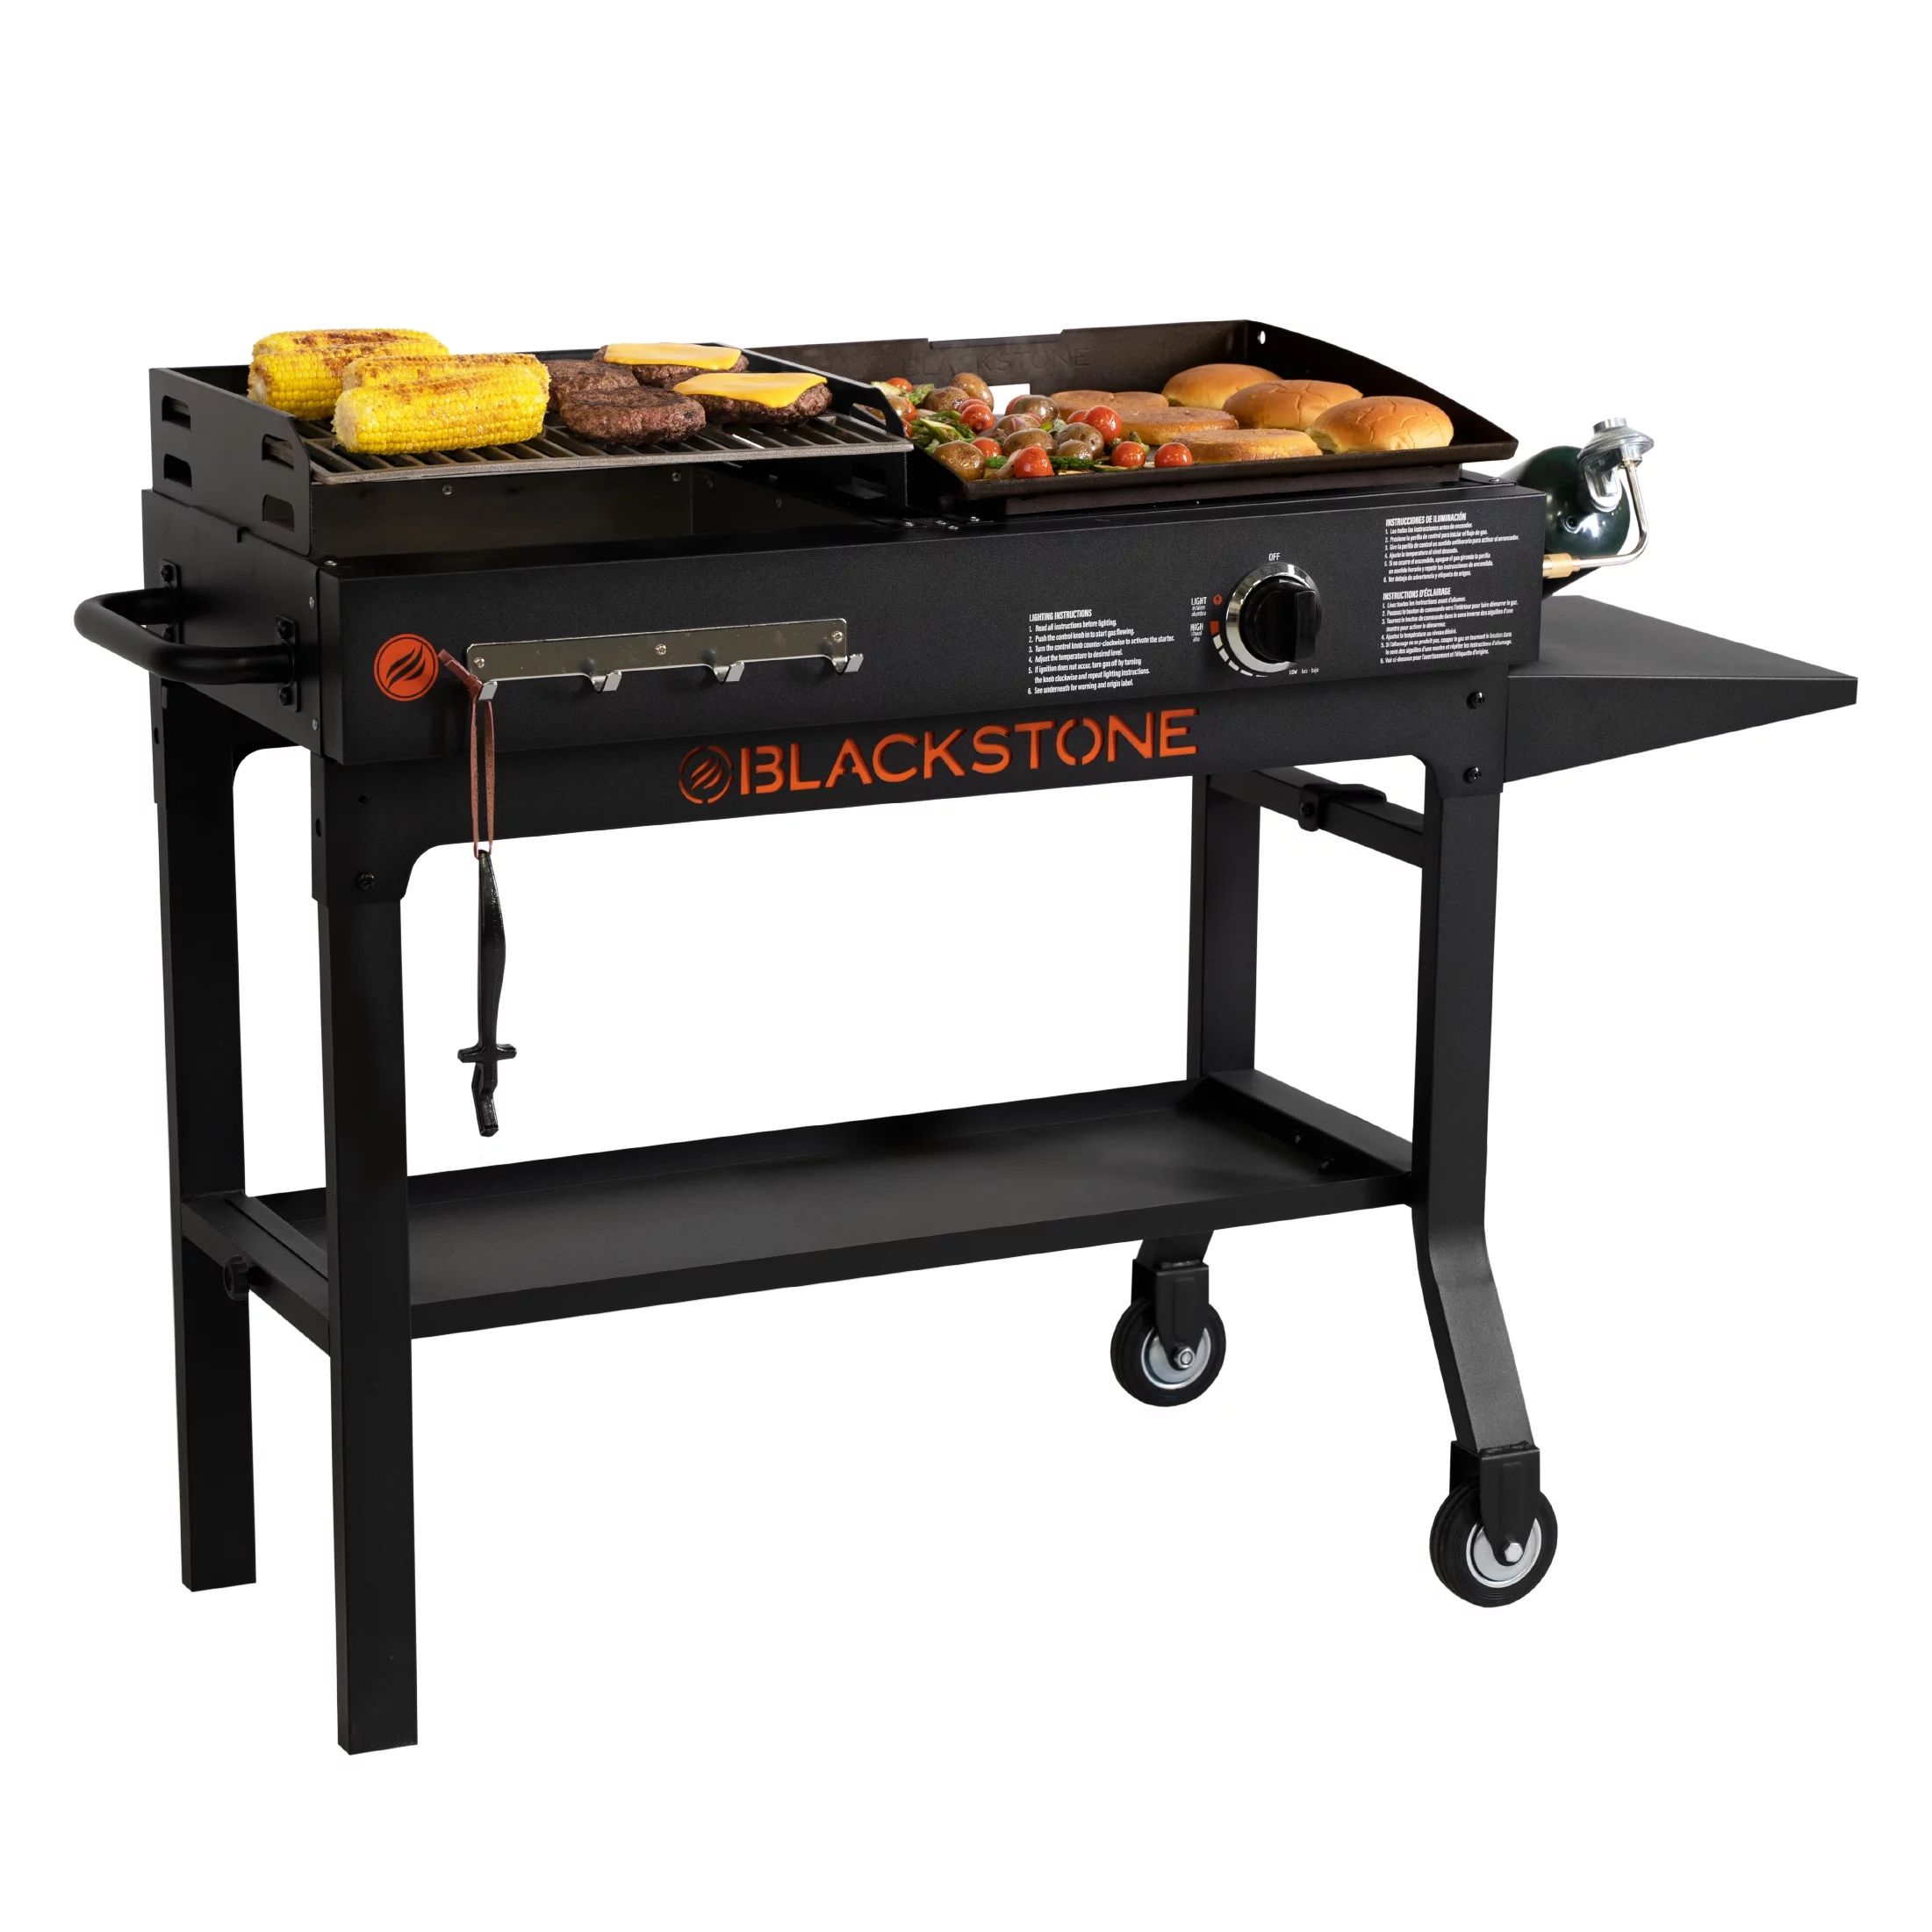 Blackstone Duo 17" Griddle and Charcoal Grill Combo | Walmart (US)